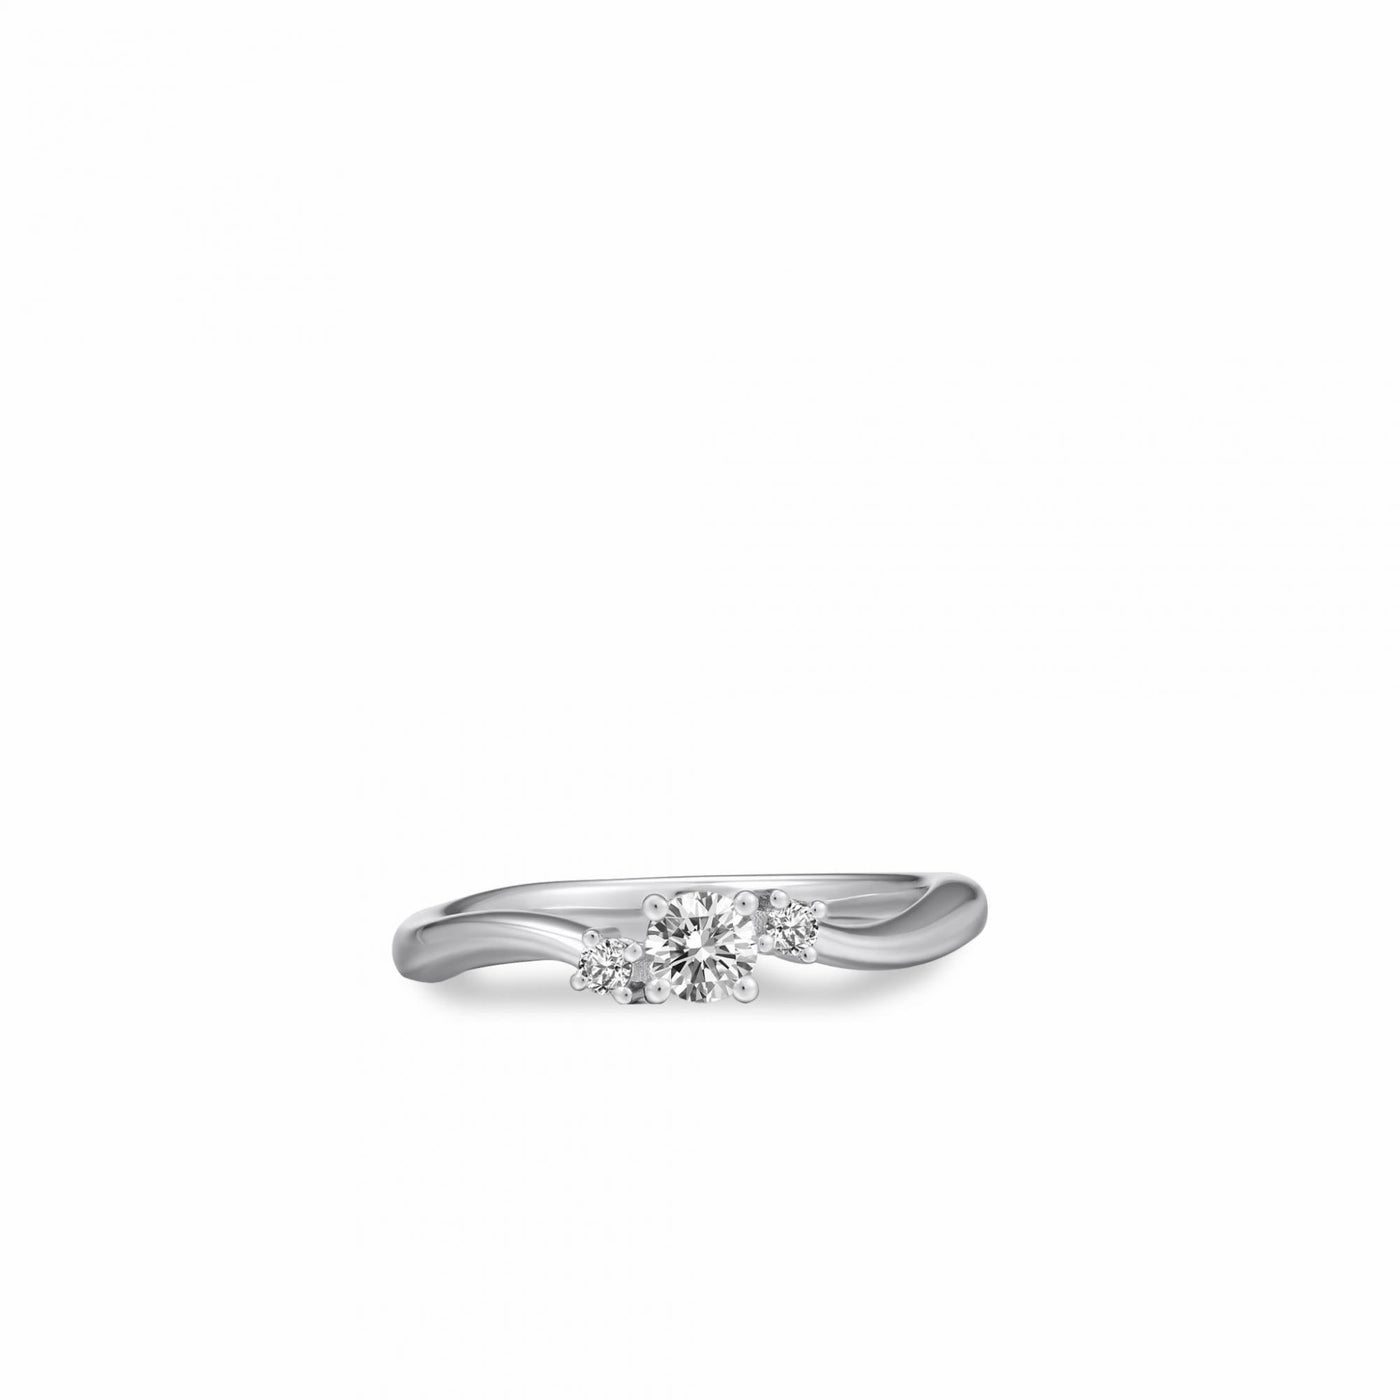 Gisser Sterling Silver Ring - Trilogy Wave Band with Zirconia Stones